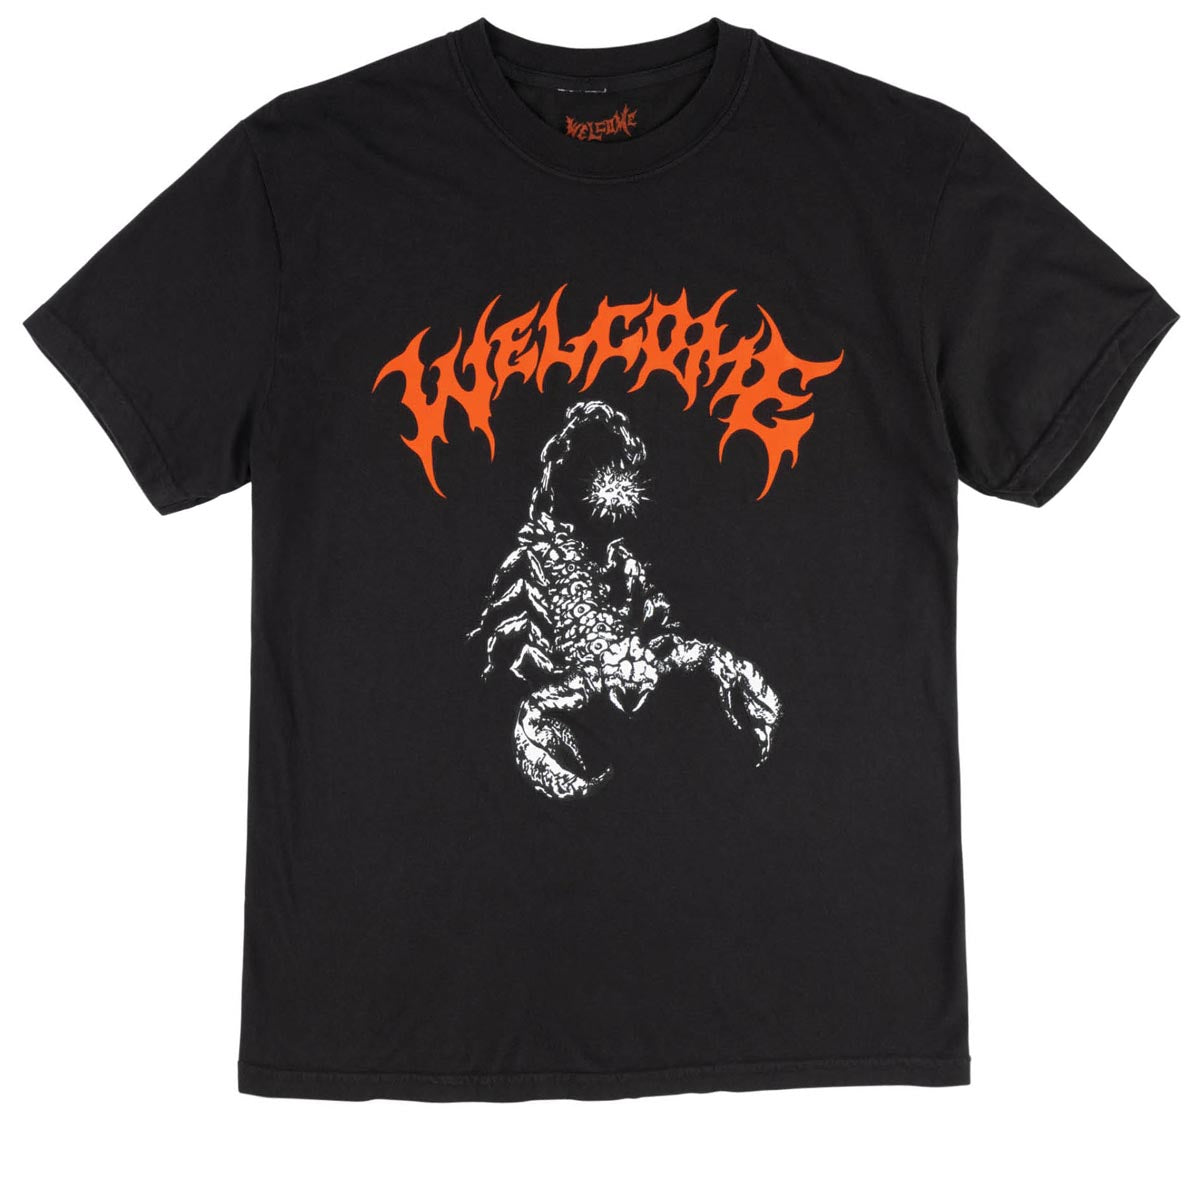 Welcome Mace T-Shirt - Black (Garment-Dyed) image 1